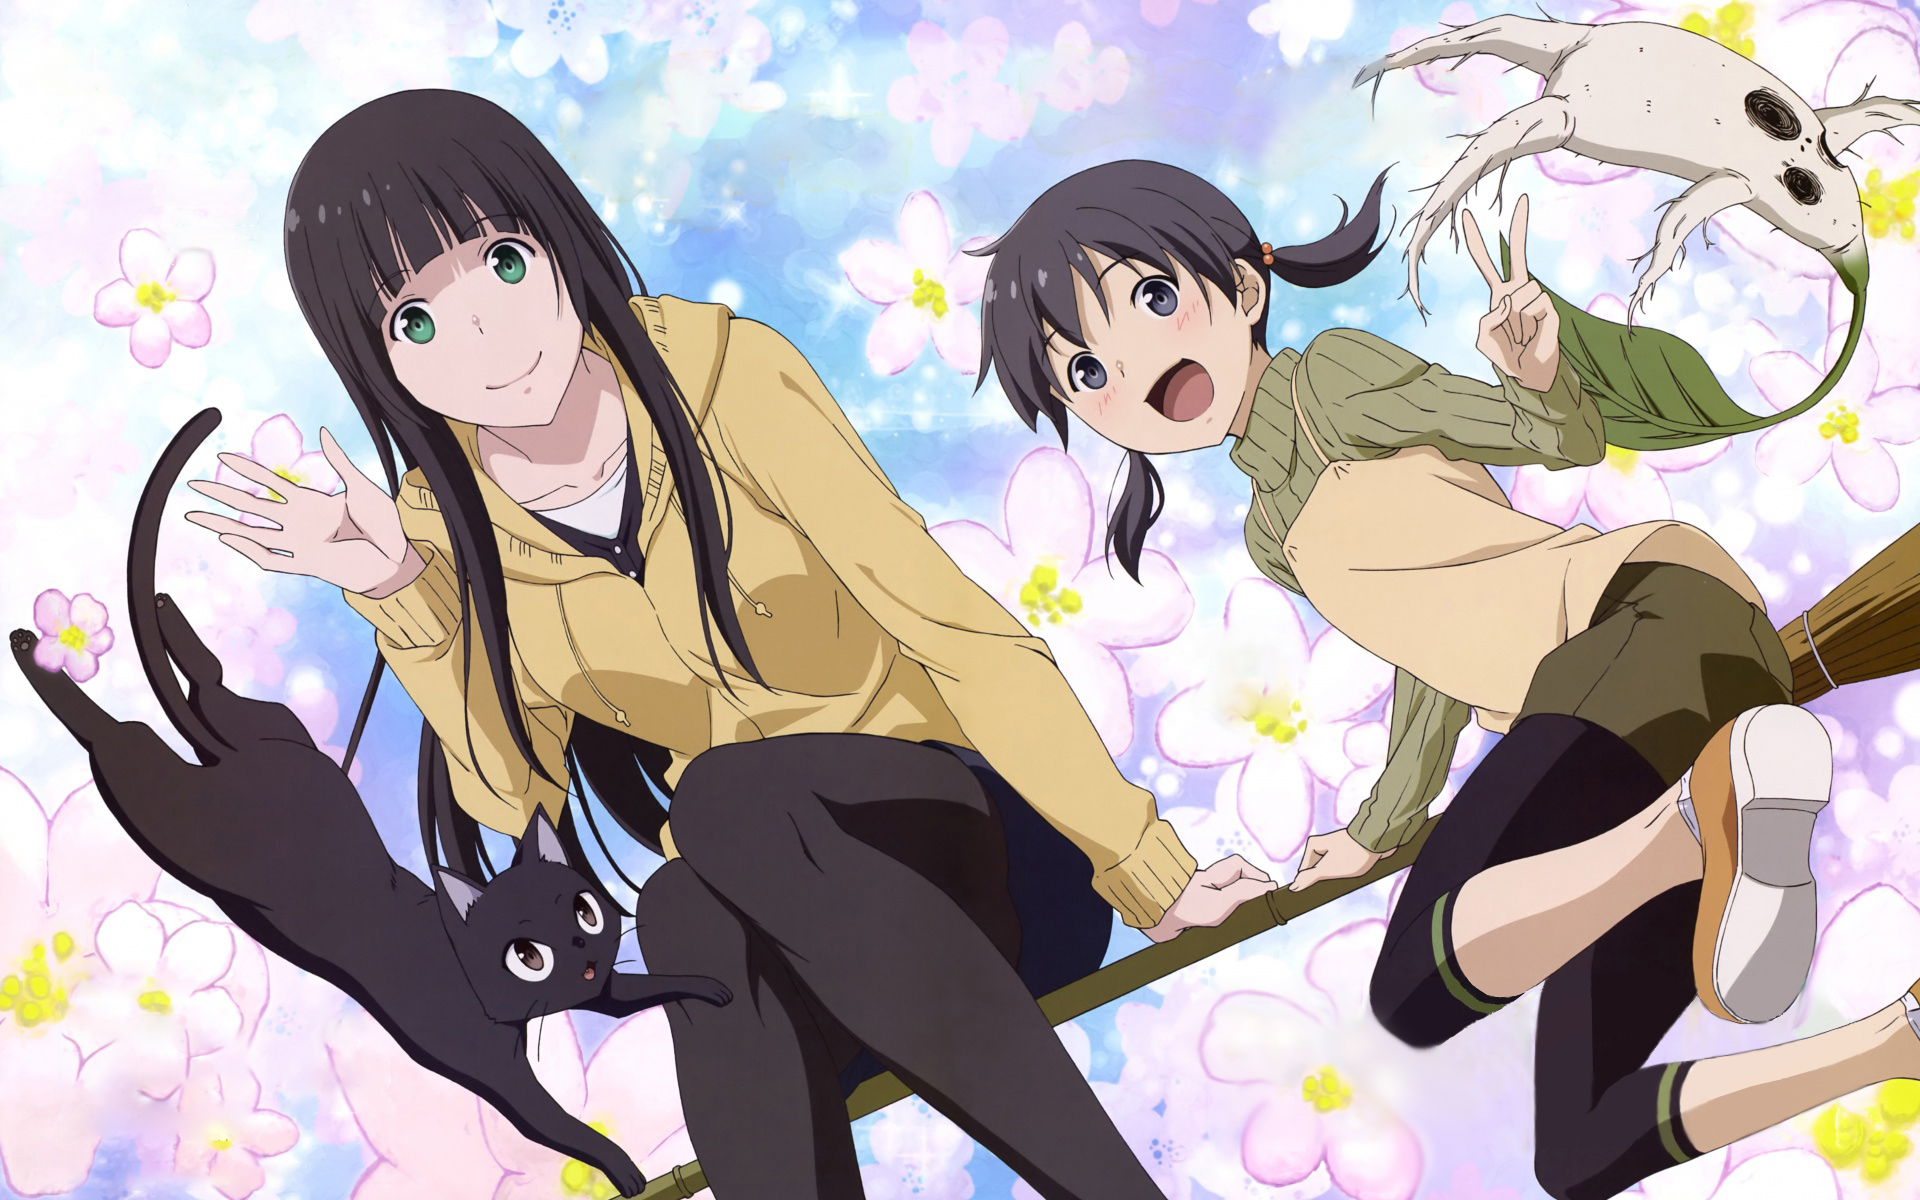 Flying Witch HD Wallpaper